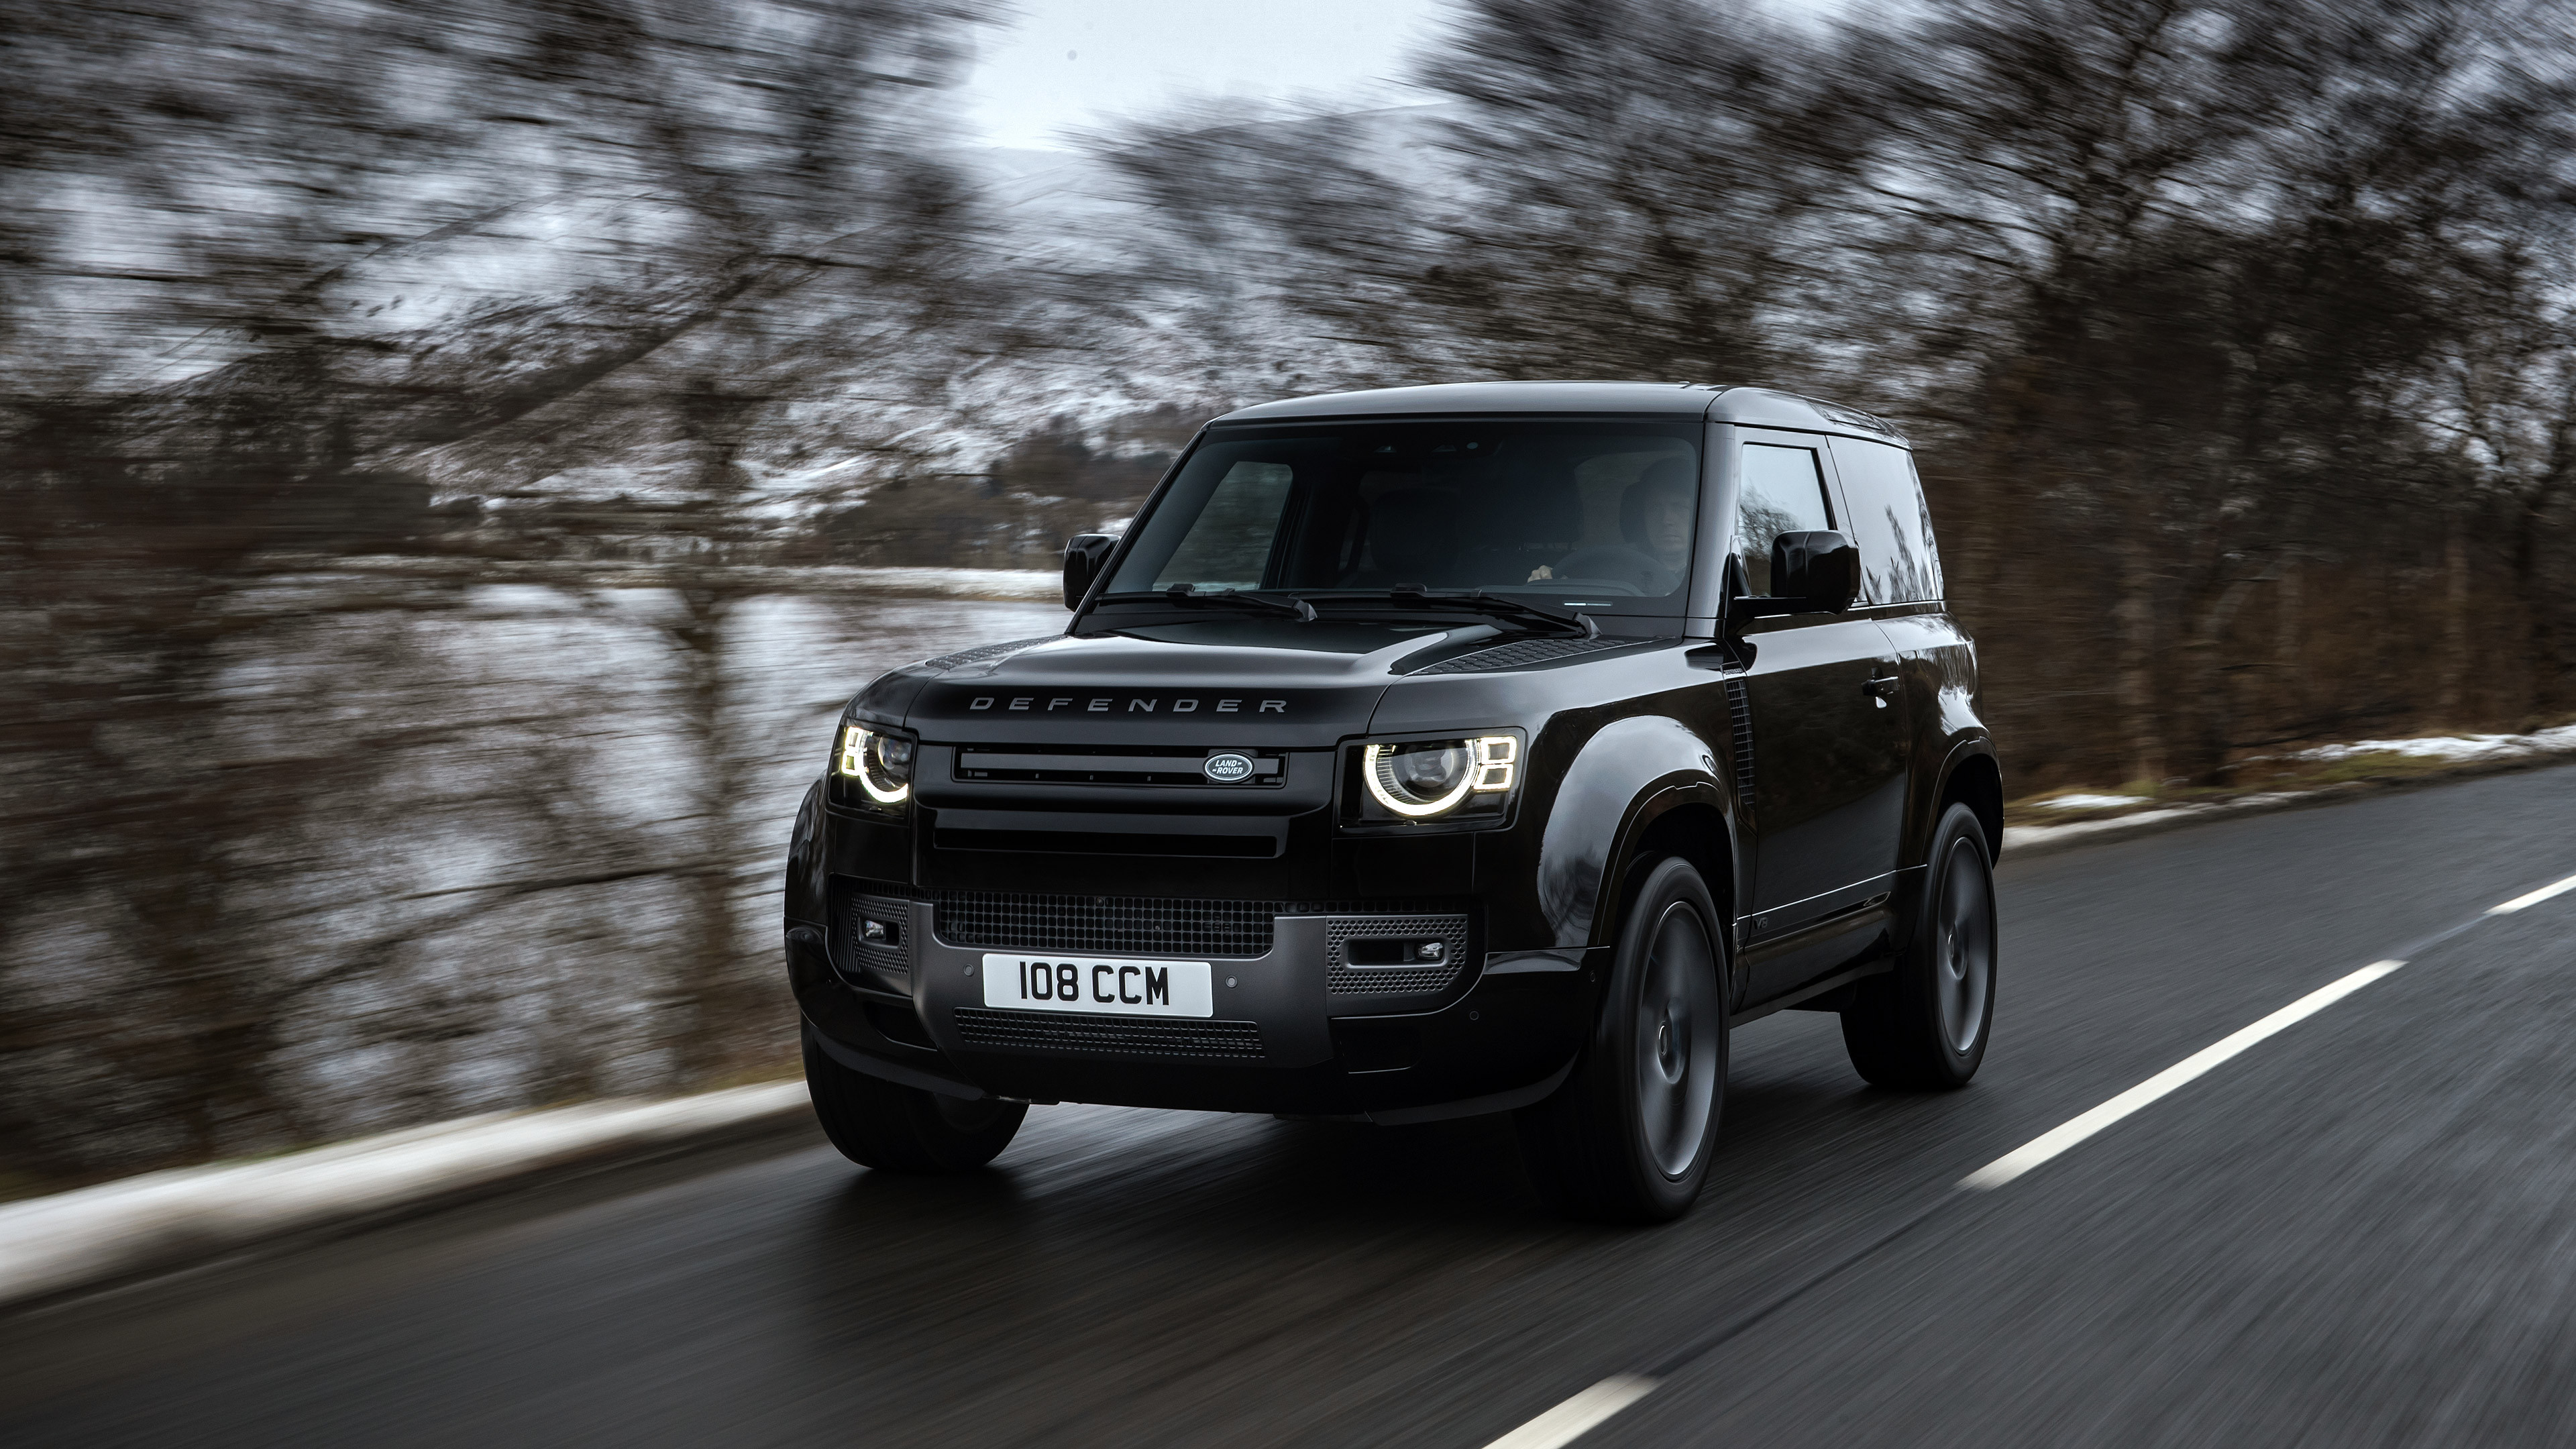 Crop Land Rover Wallpaper for Free, Black Suv Cars, Luxury Cars, Road, Timelapse HD Background